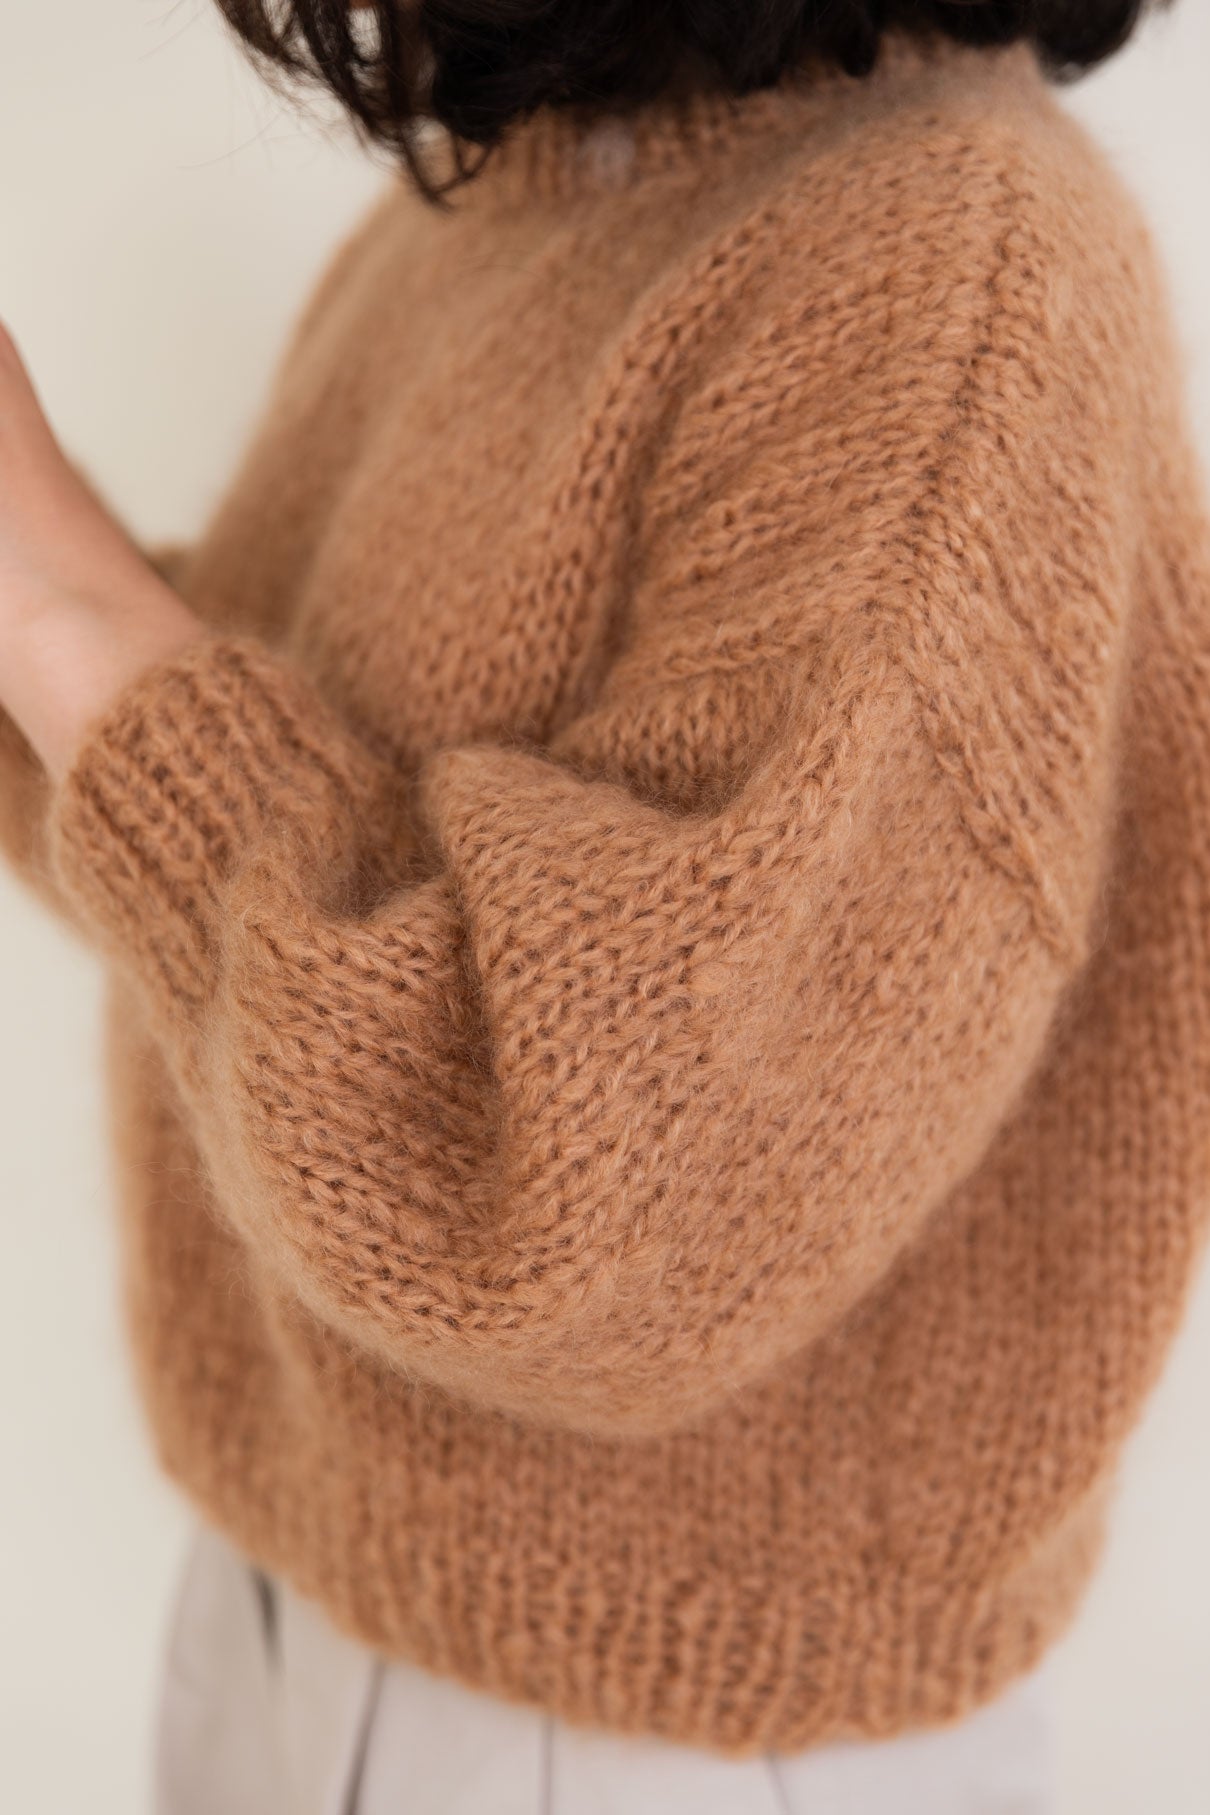 Camel mohair and organic wool sweater, oversized fit and a boxy shape.